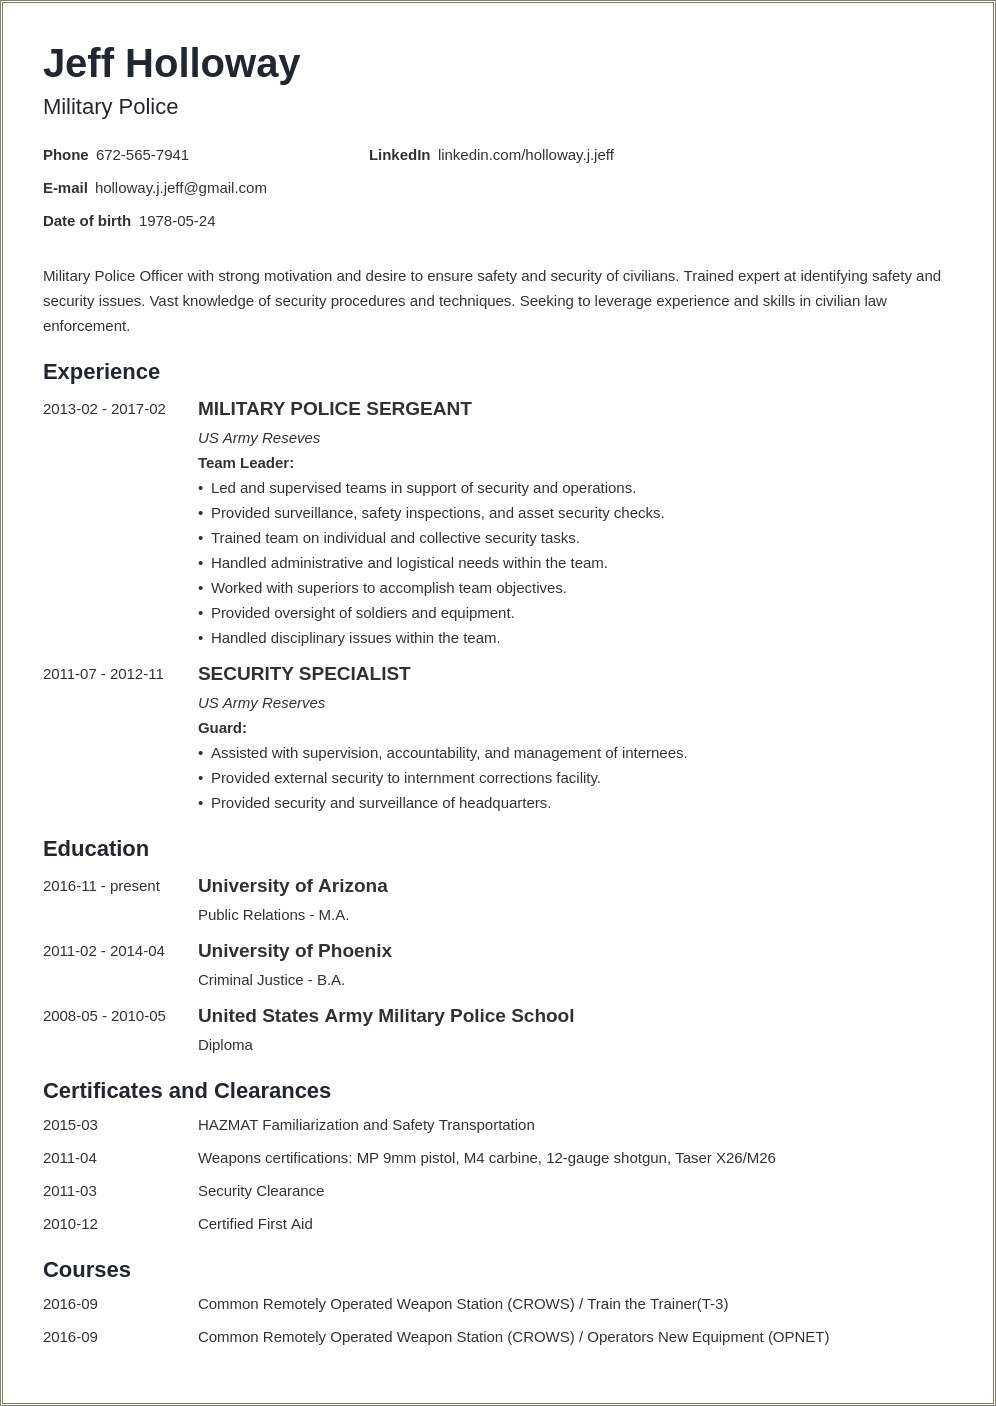 Is Having A Clearance Considered A Skill Resume